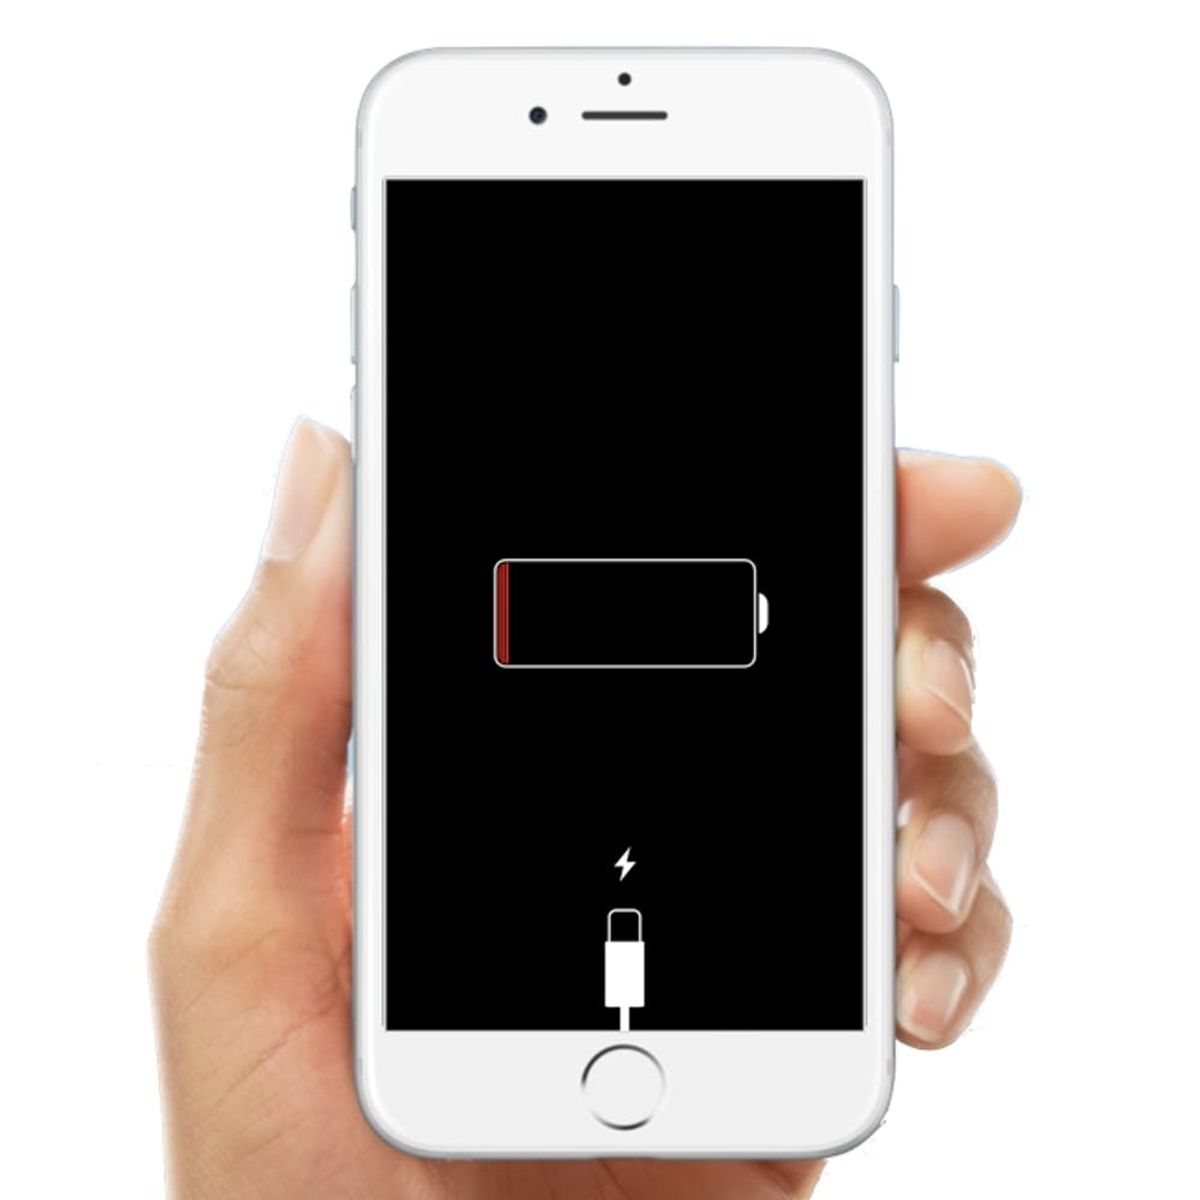 Oops: Your iPhone 6S Battery Life Reading Isn’t Accurate